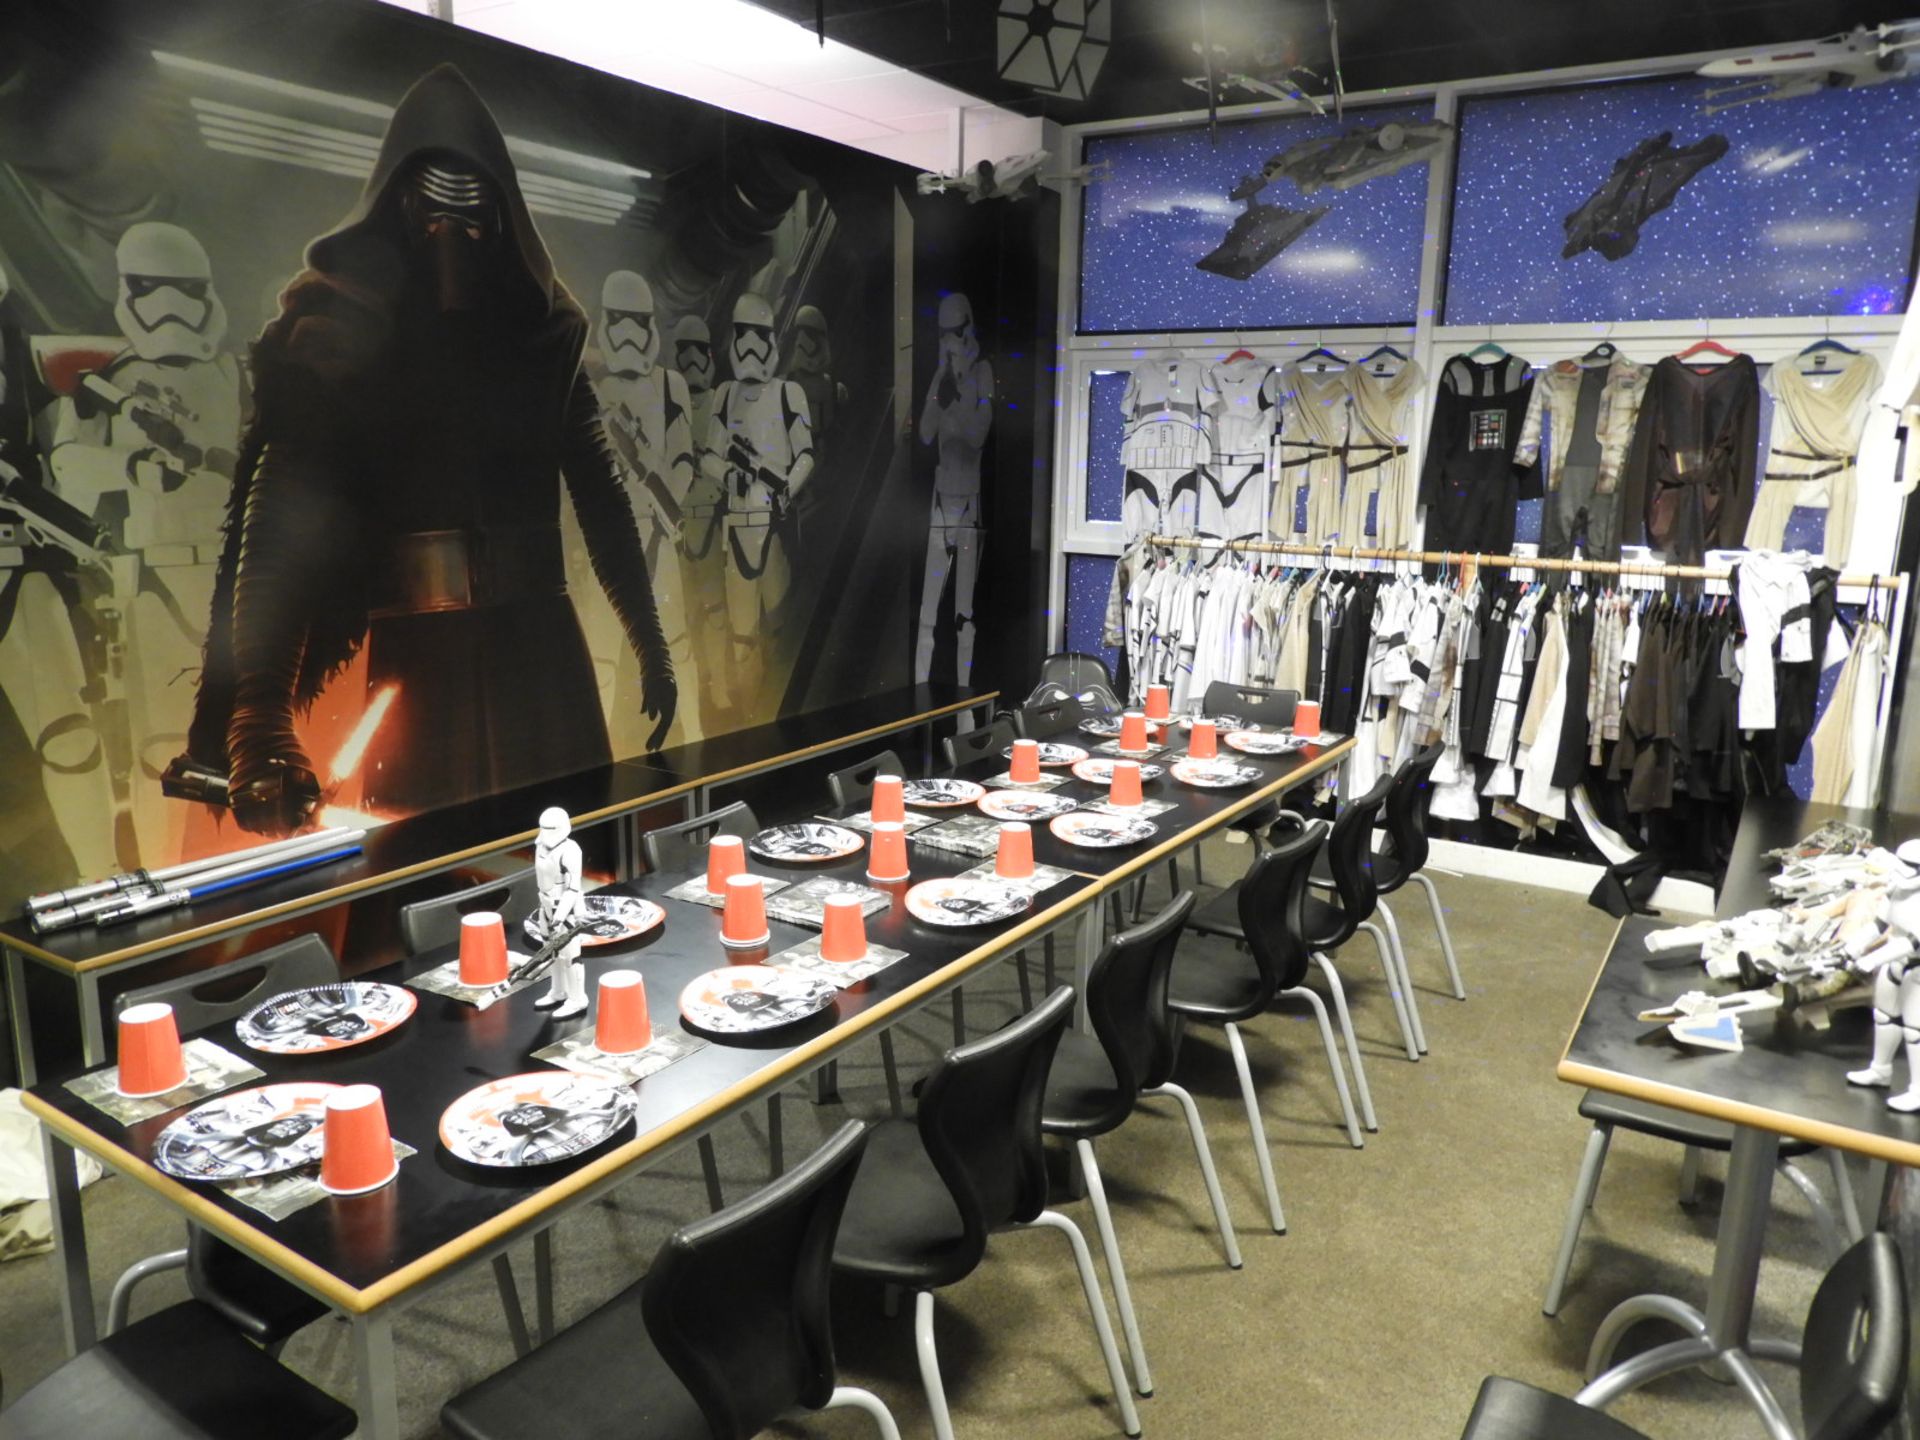 *Contents of Star Wars Themed Party Room which Con - Image 4 of 4